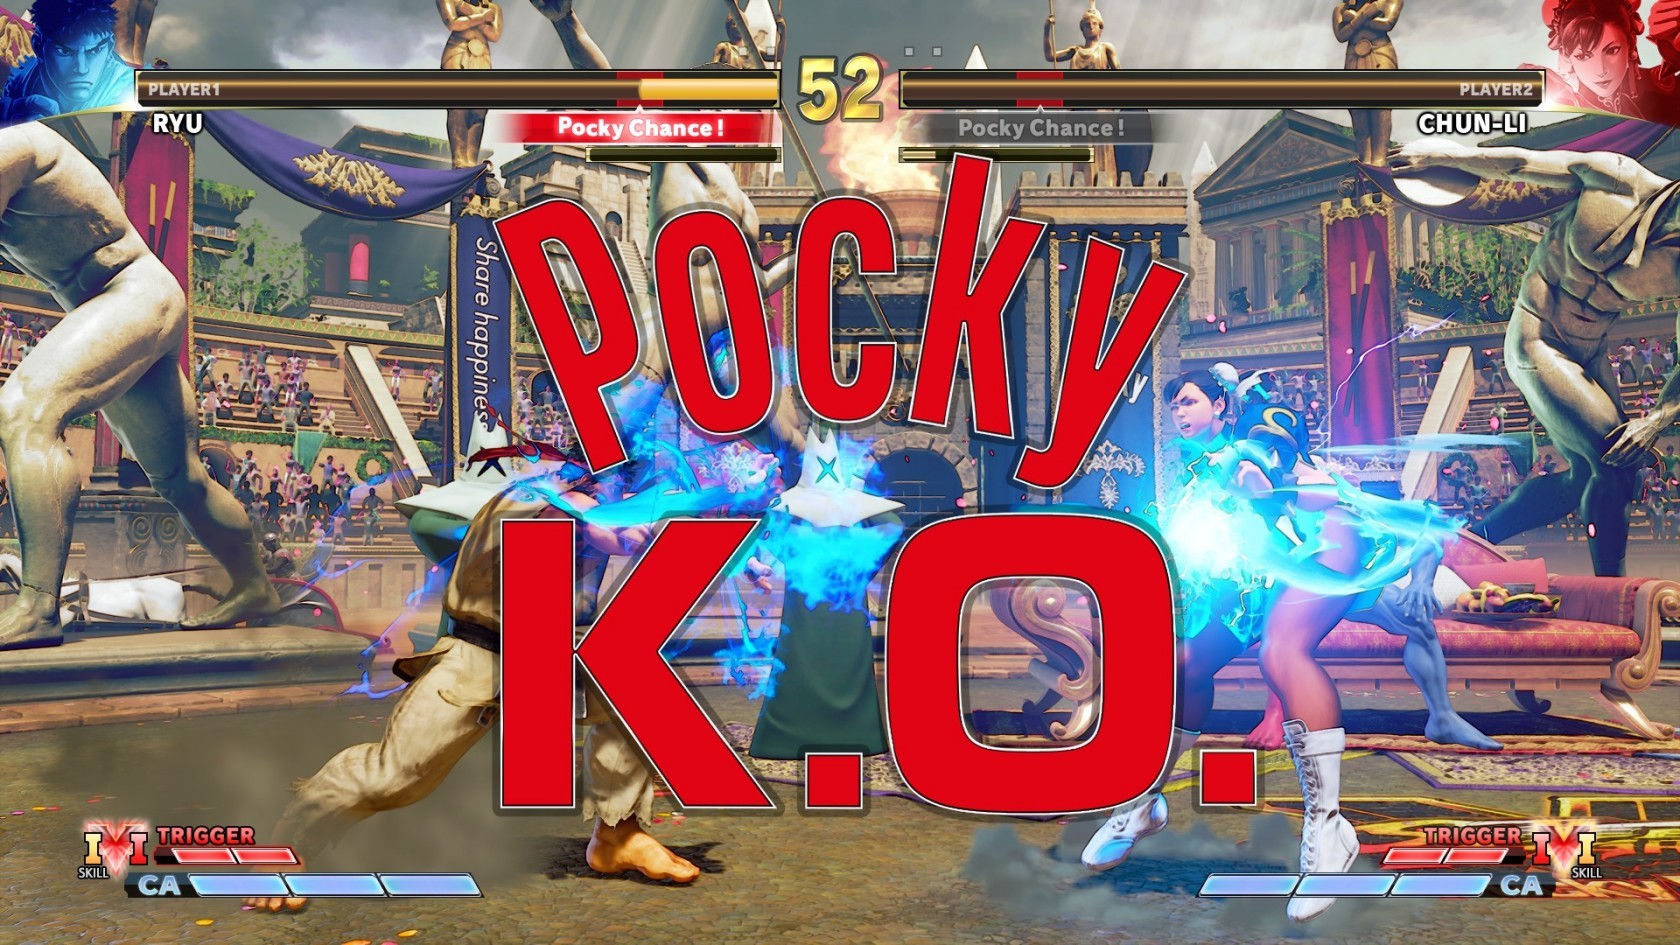 K.O. on-the-go with Street Fighter IV Champion Edition